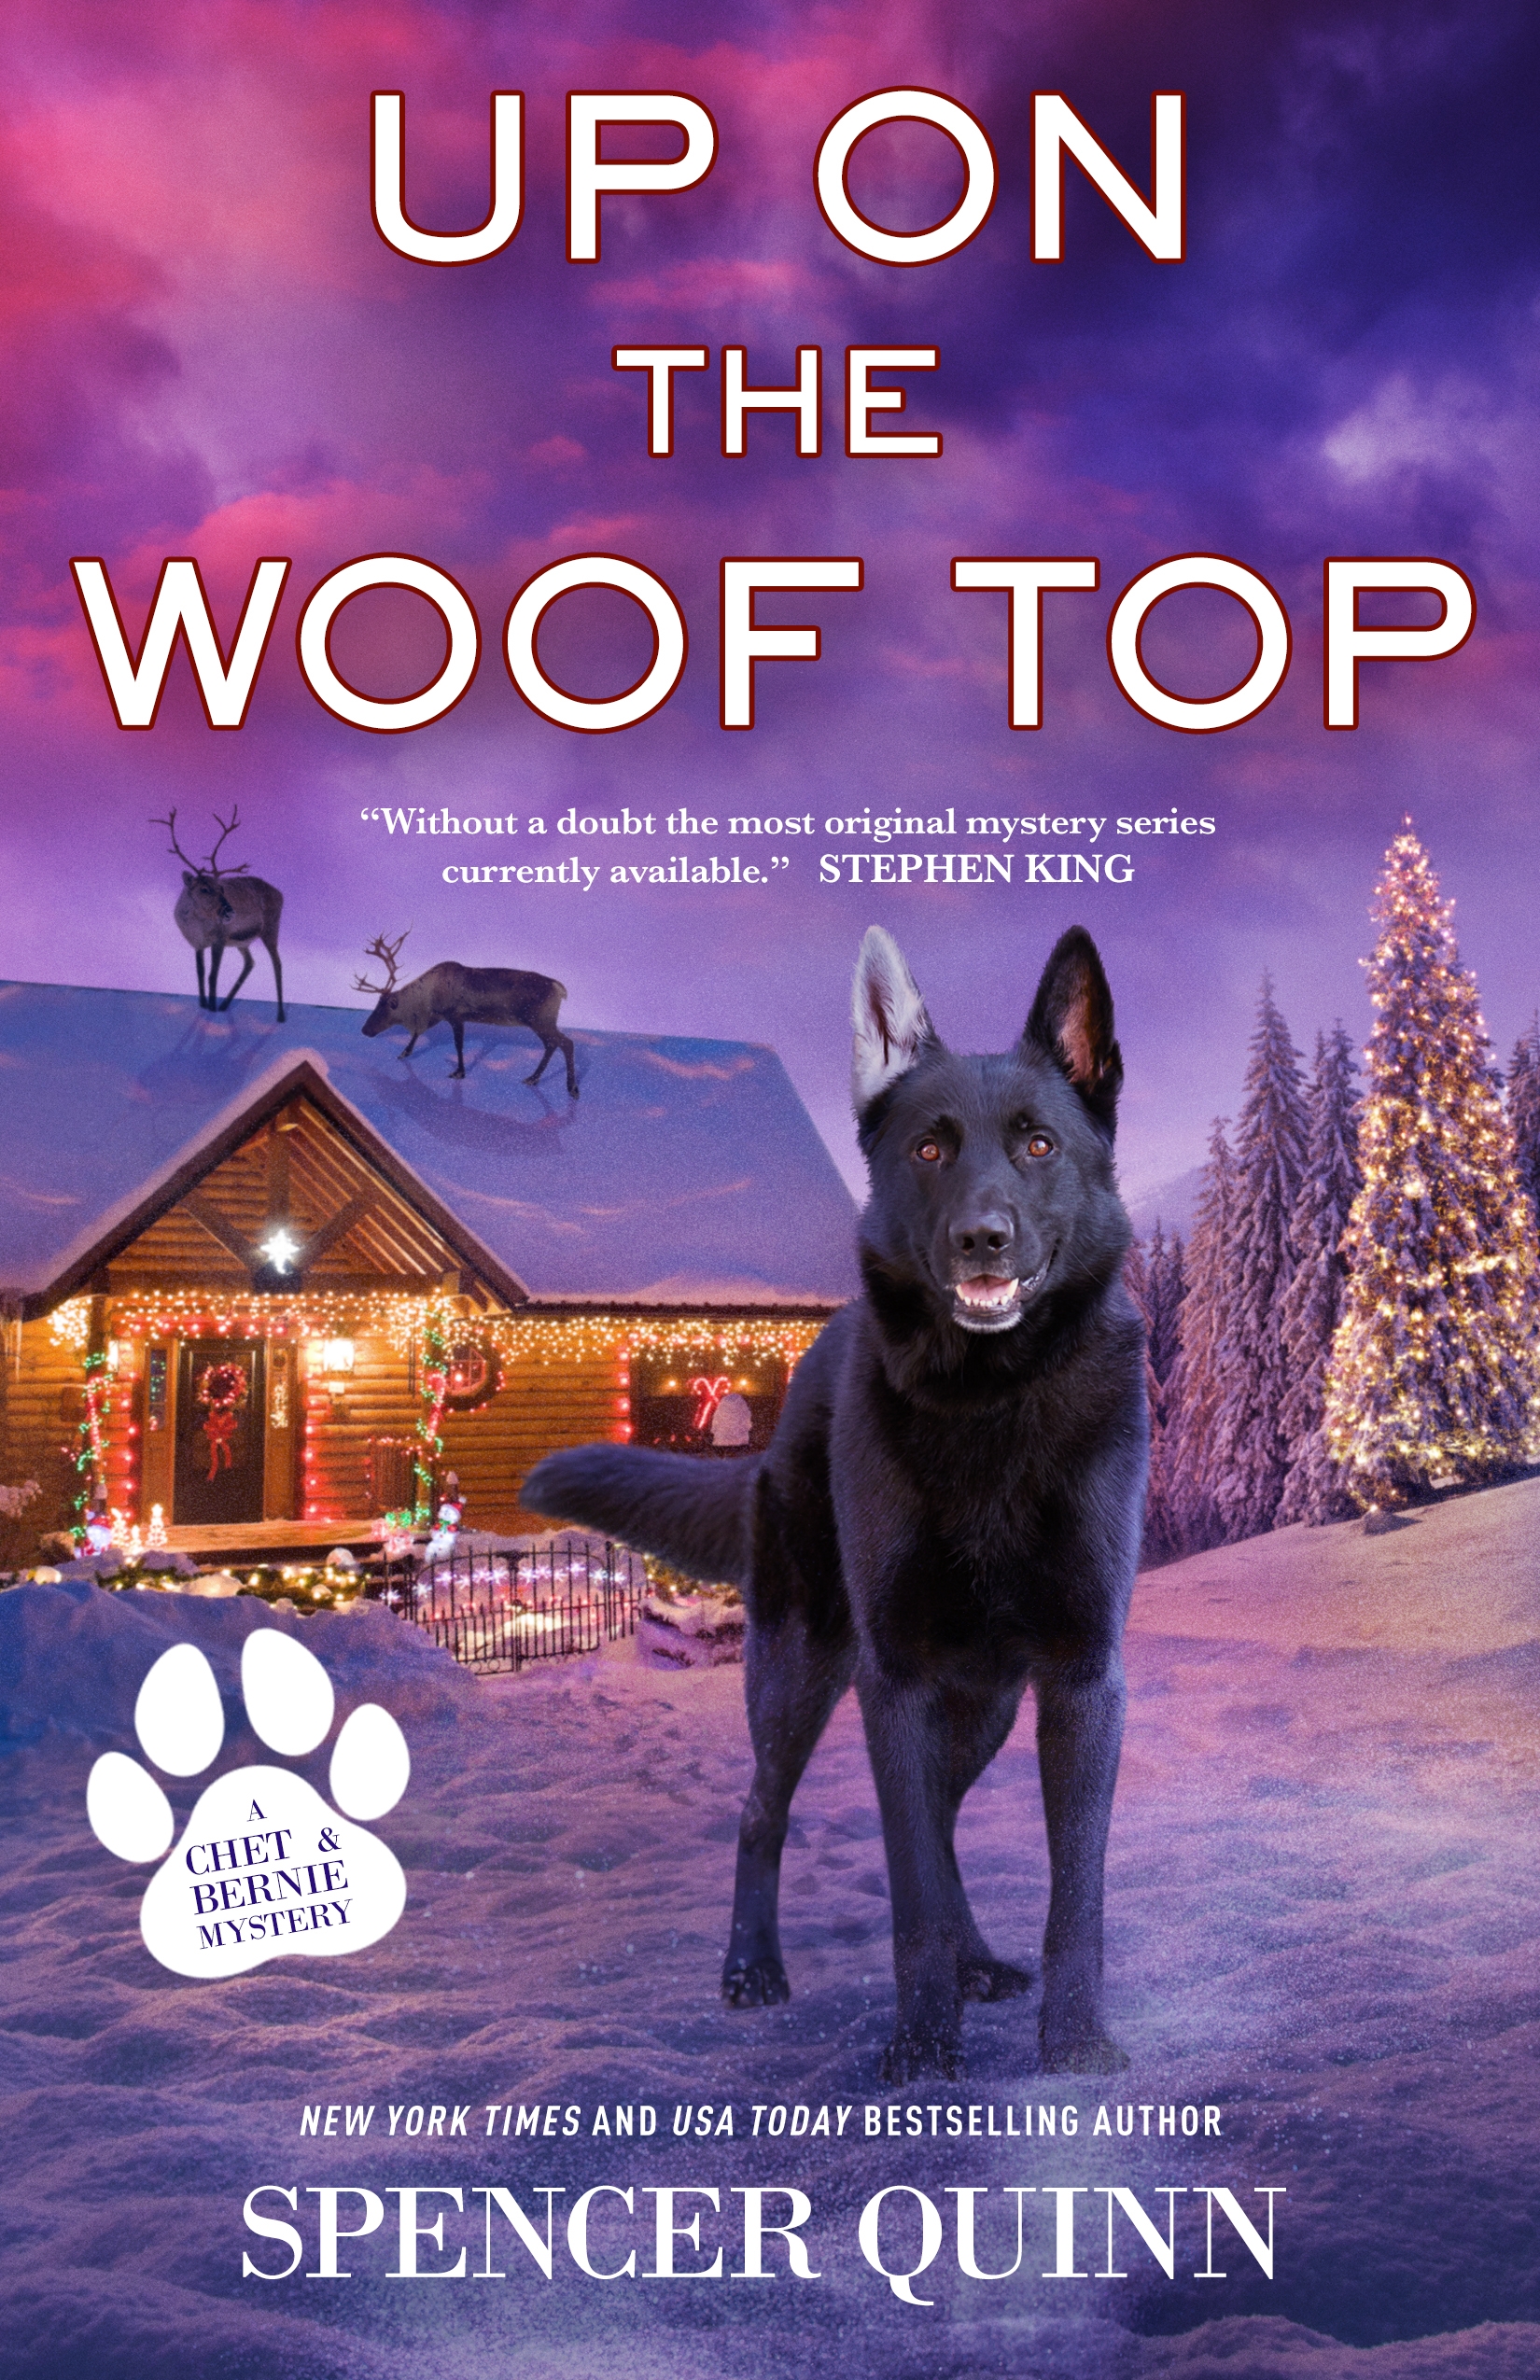 Up on the Woof Top : A Chet & Bernie Mystery by Spencer Quinn